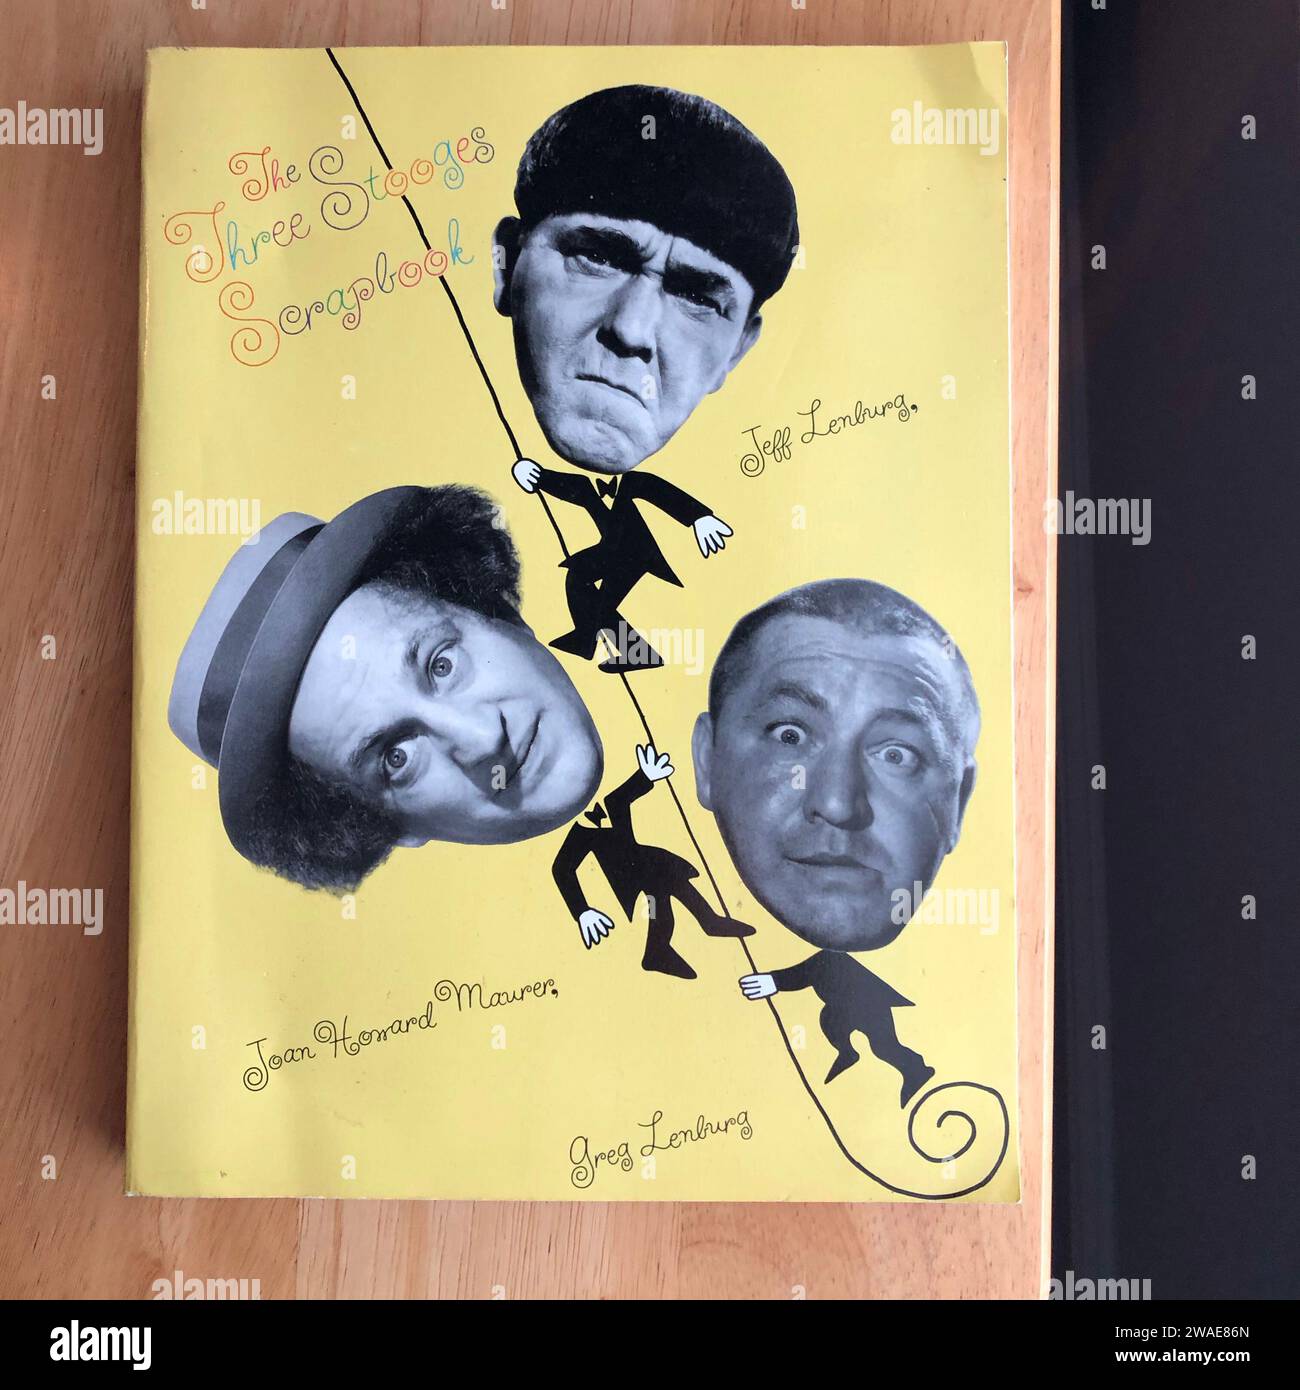 A closeup shot of the cover of the Three Stooges Scrapbook with Moe, Larry and Curly Stock Photo